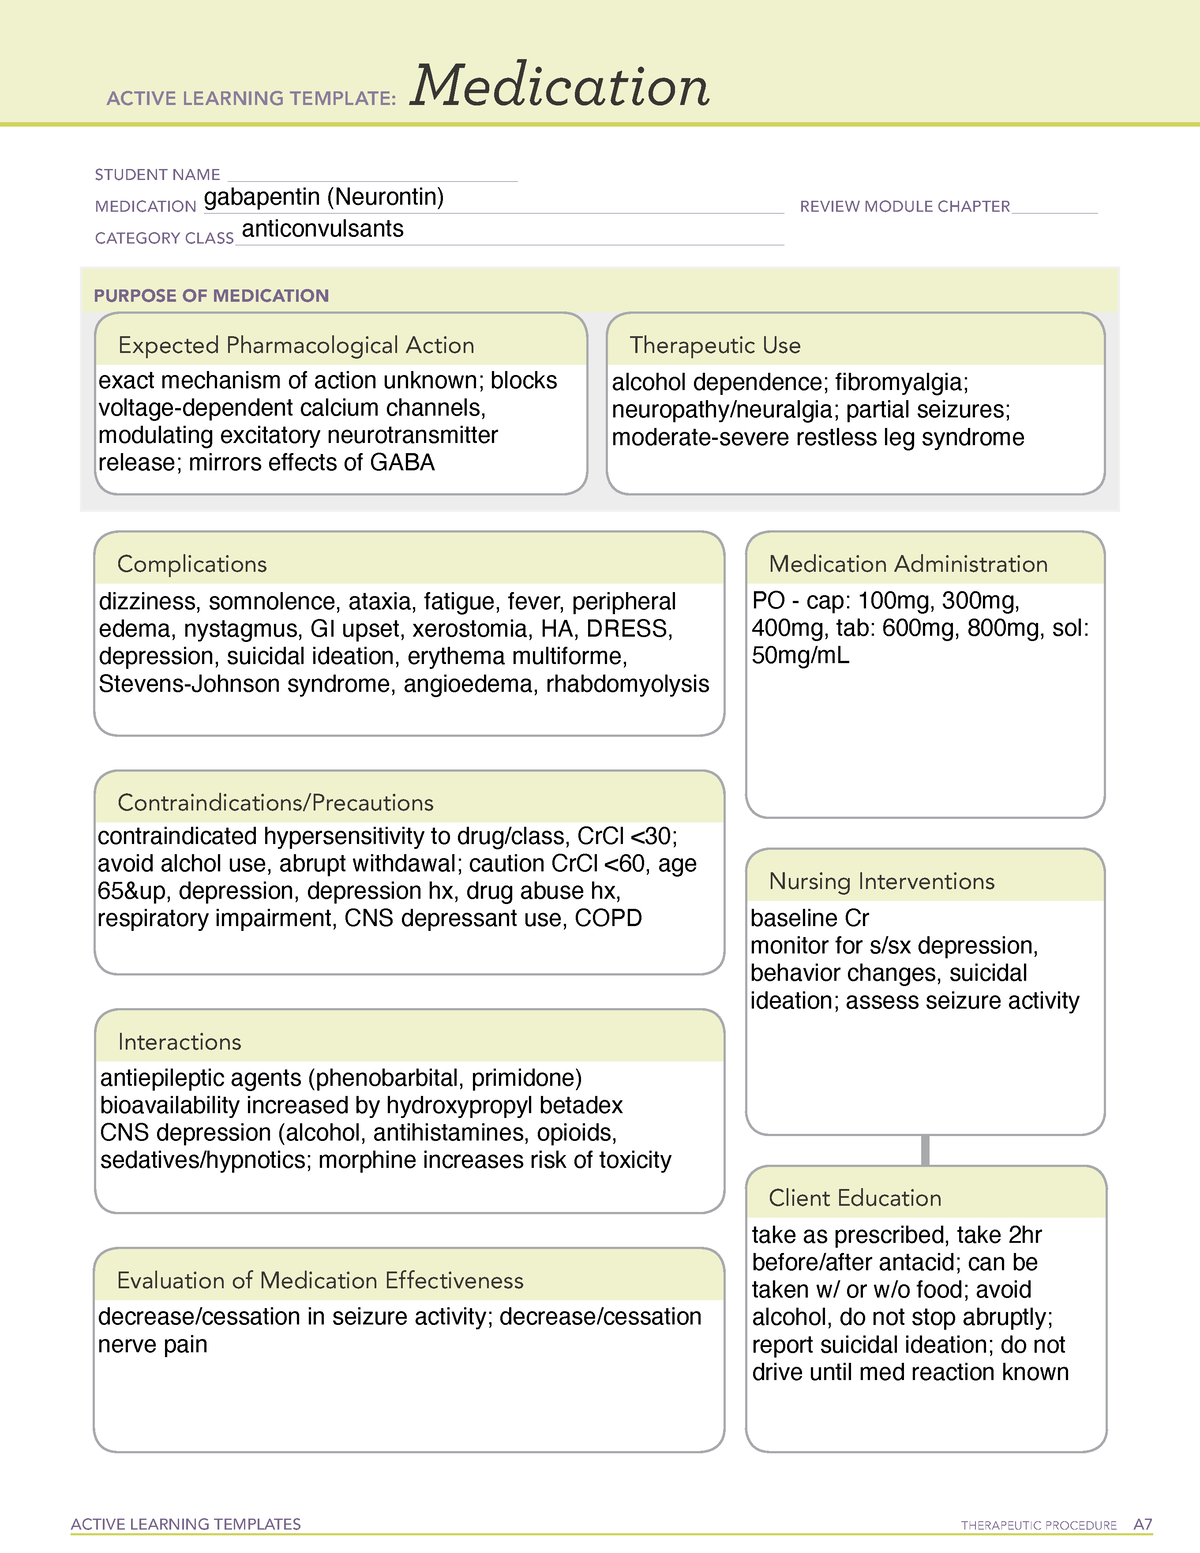 Active Learning Template Medication Gabapentin ACTIVE LEARNING